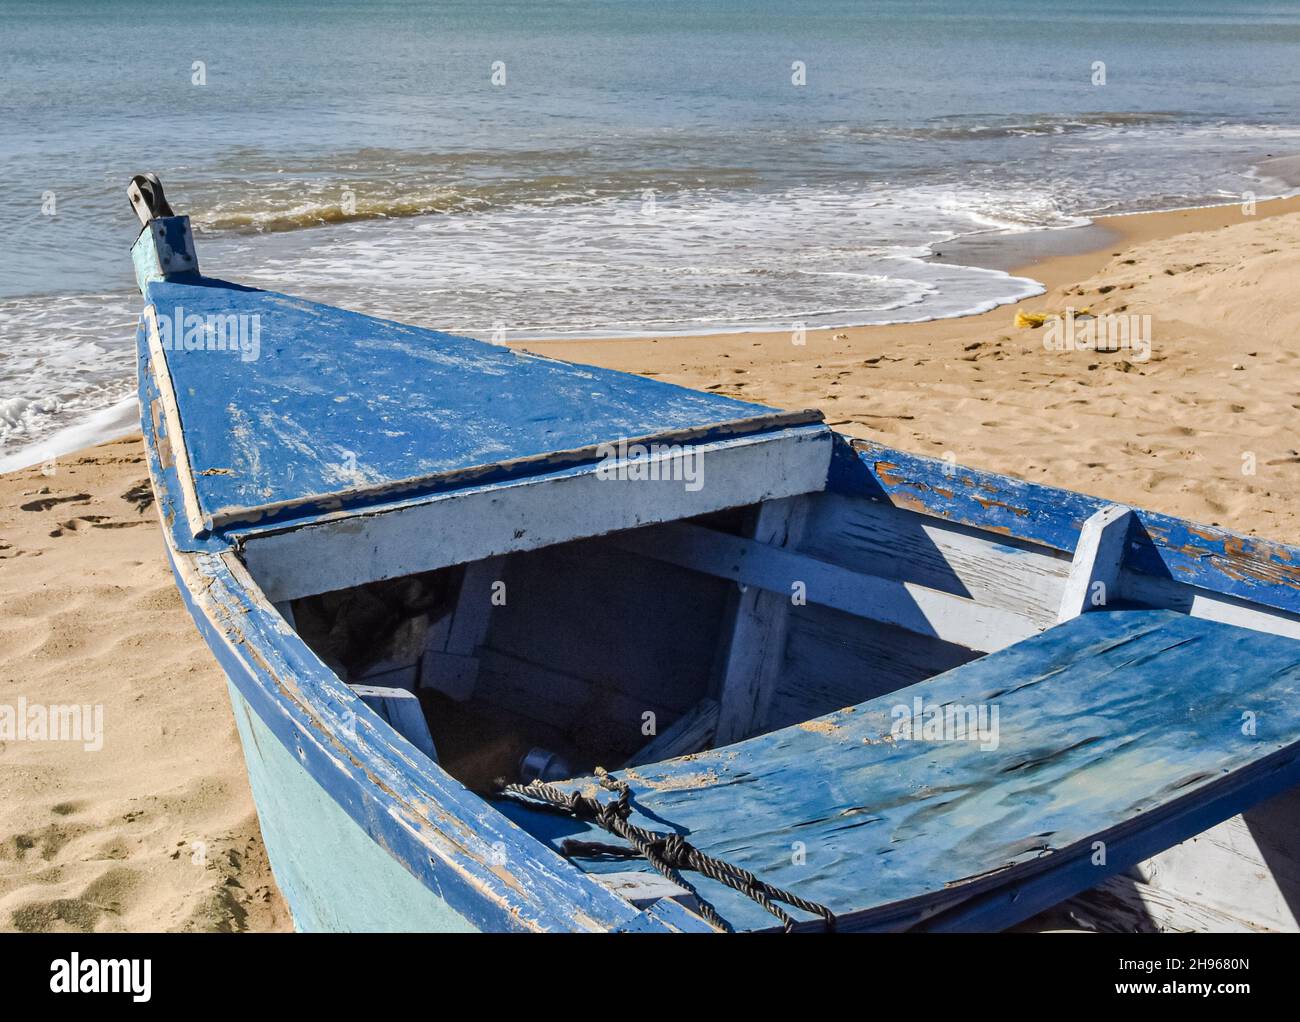 Close up of a traditional Puerto Rican fishing boat on a sand beach. Copy space. Stock Photo